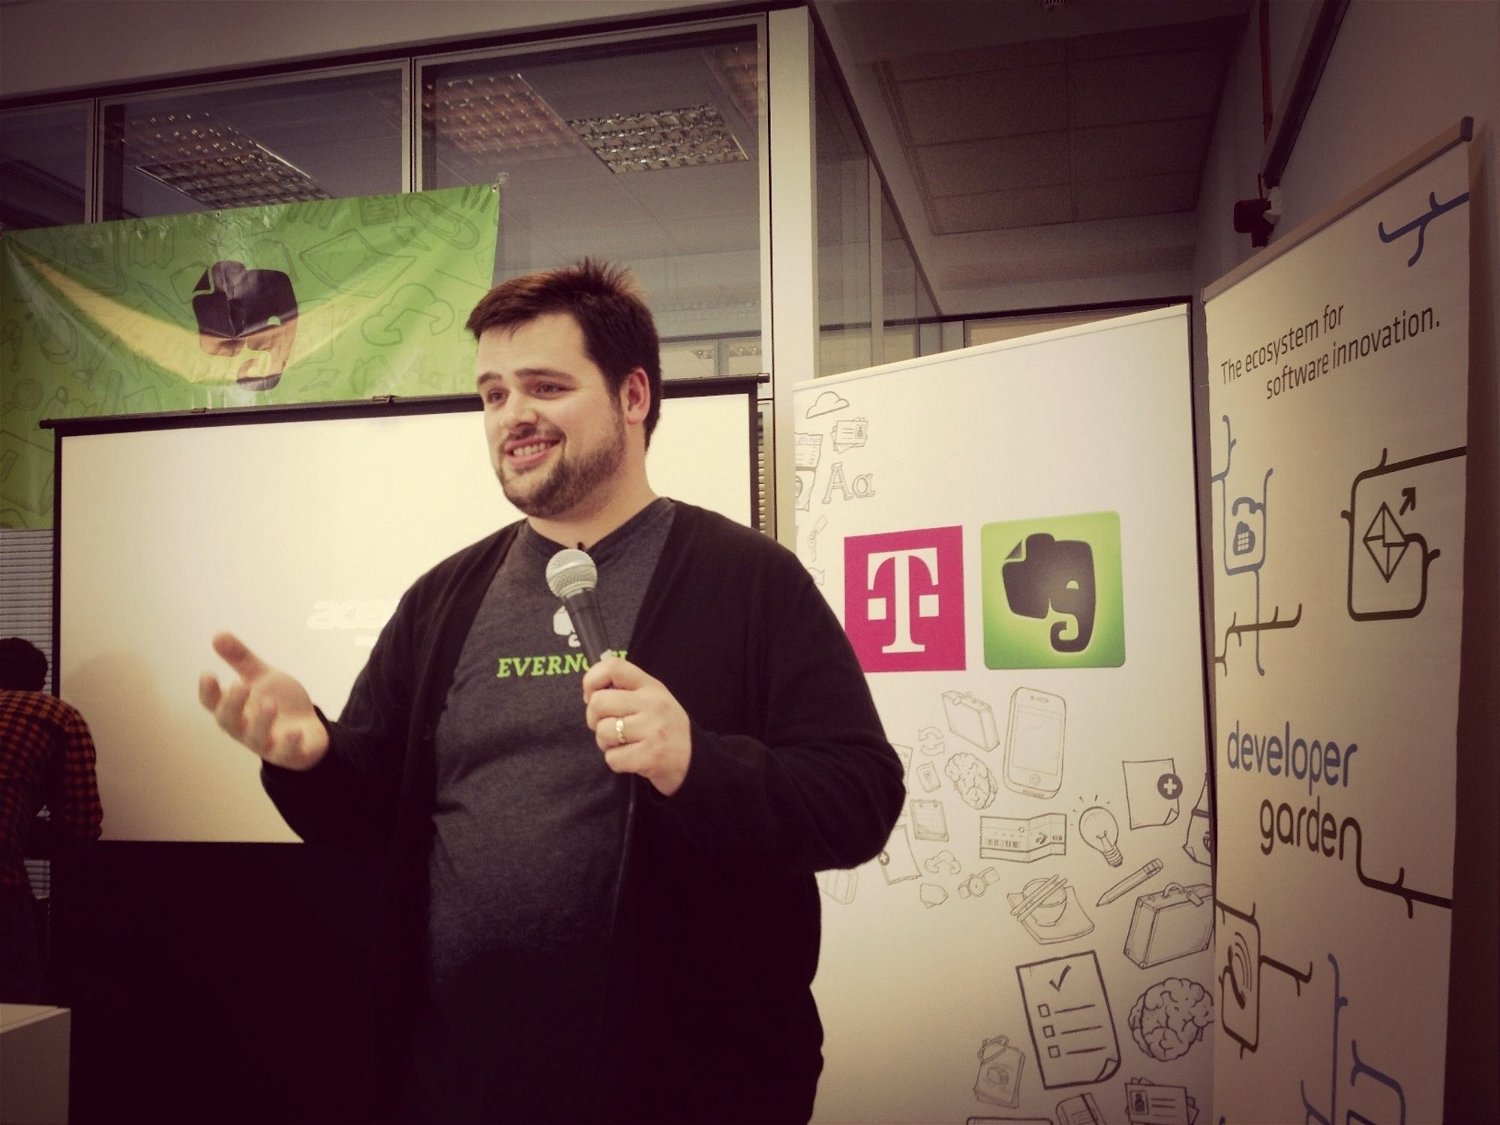 Q&A with Chris Traganos of Evernote: "Berlin's Where It's At" - Berlin Tech News from Silicon Allee